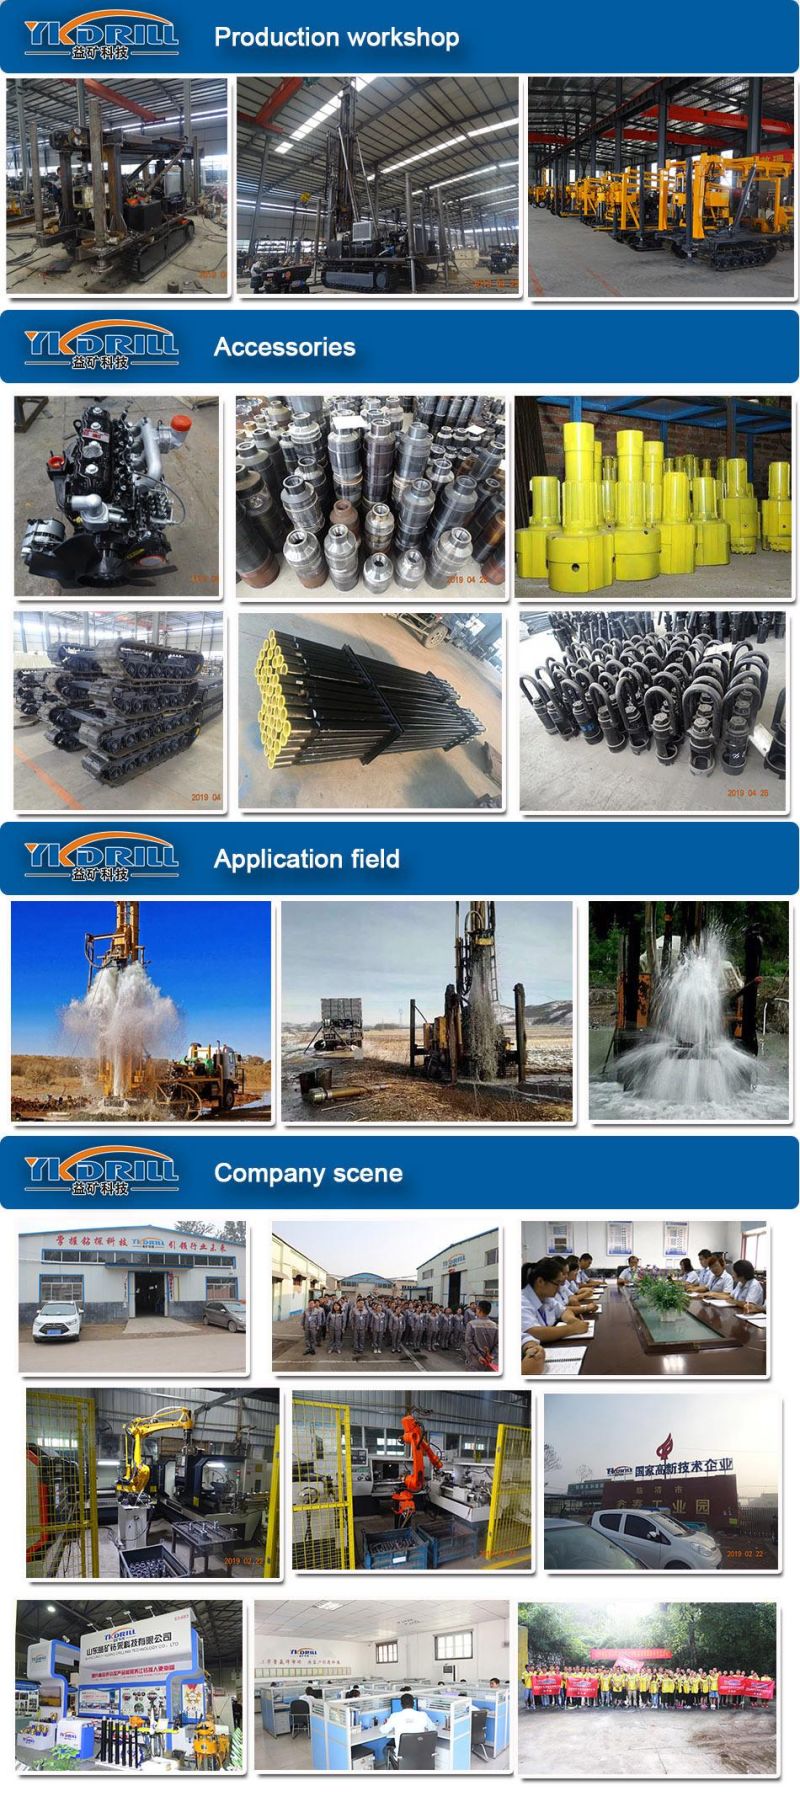 Hydraulic Water Well Drilling Machine / Core Drilling Rigs /Oil and Electric Power Drilling